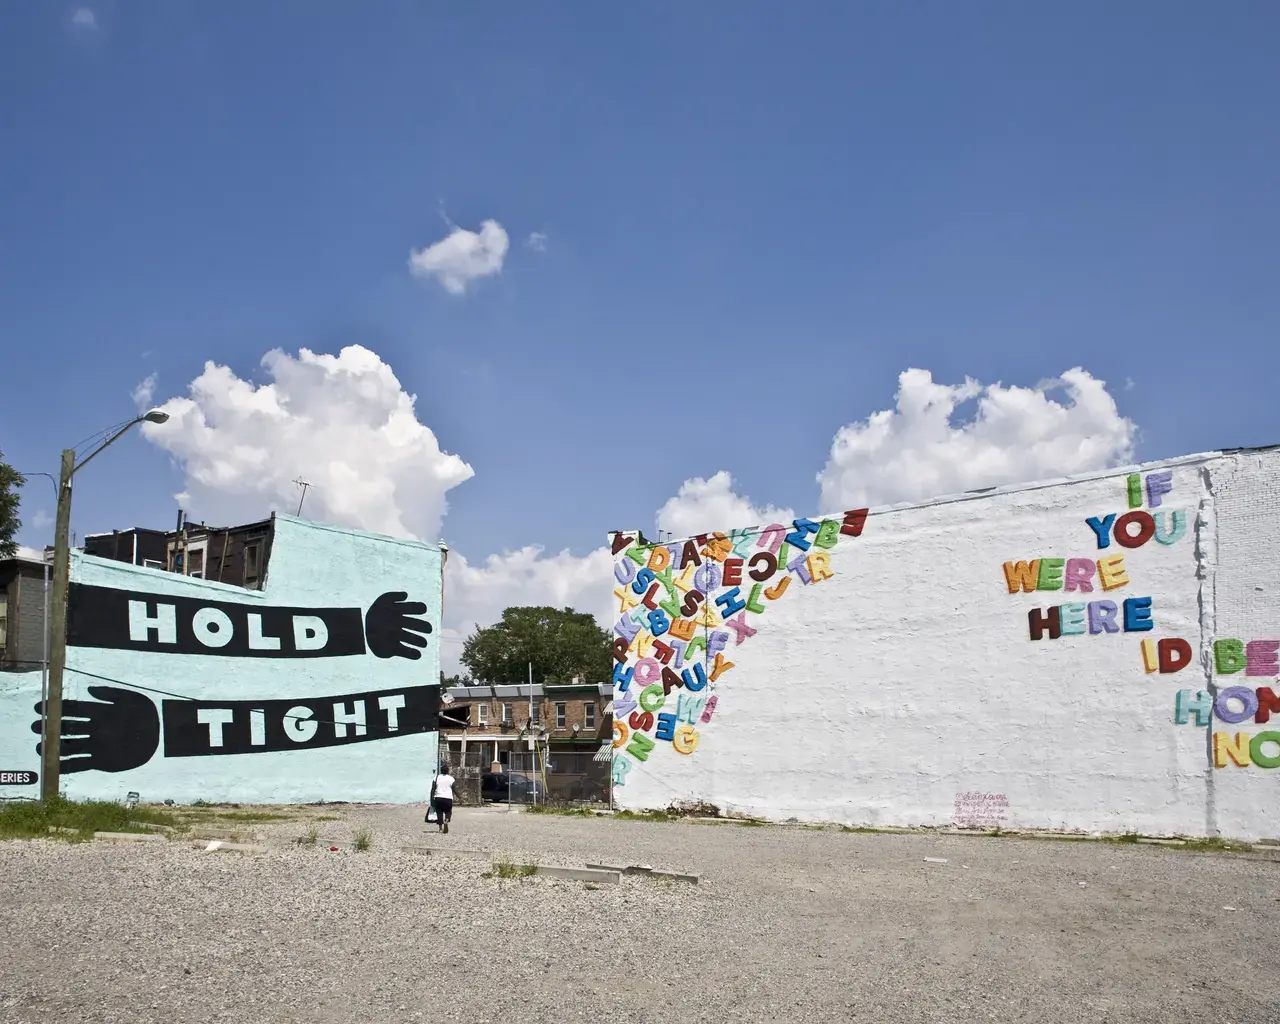 Love Letter&nbsp;by Steve Powers, produced by Philadelphia Mural Arts Program. Photo by Adam Wallacavage.